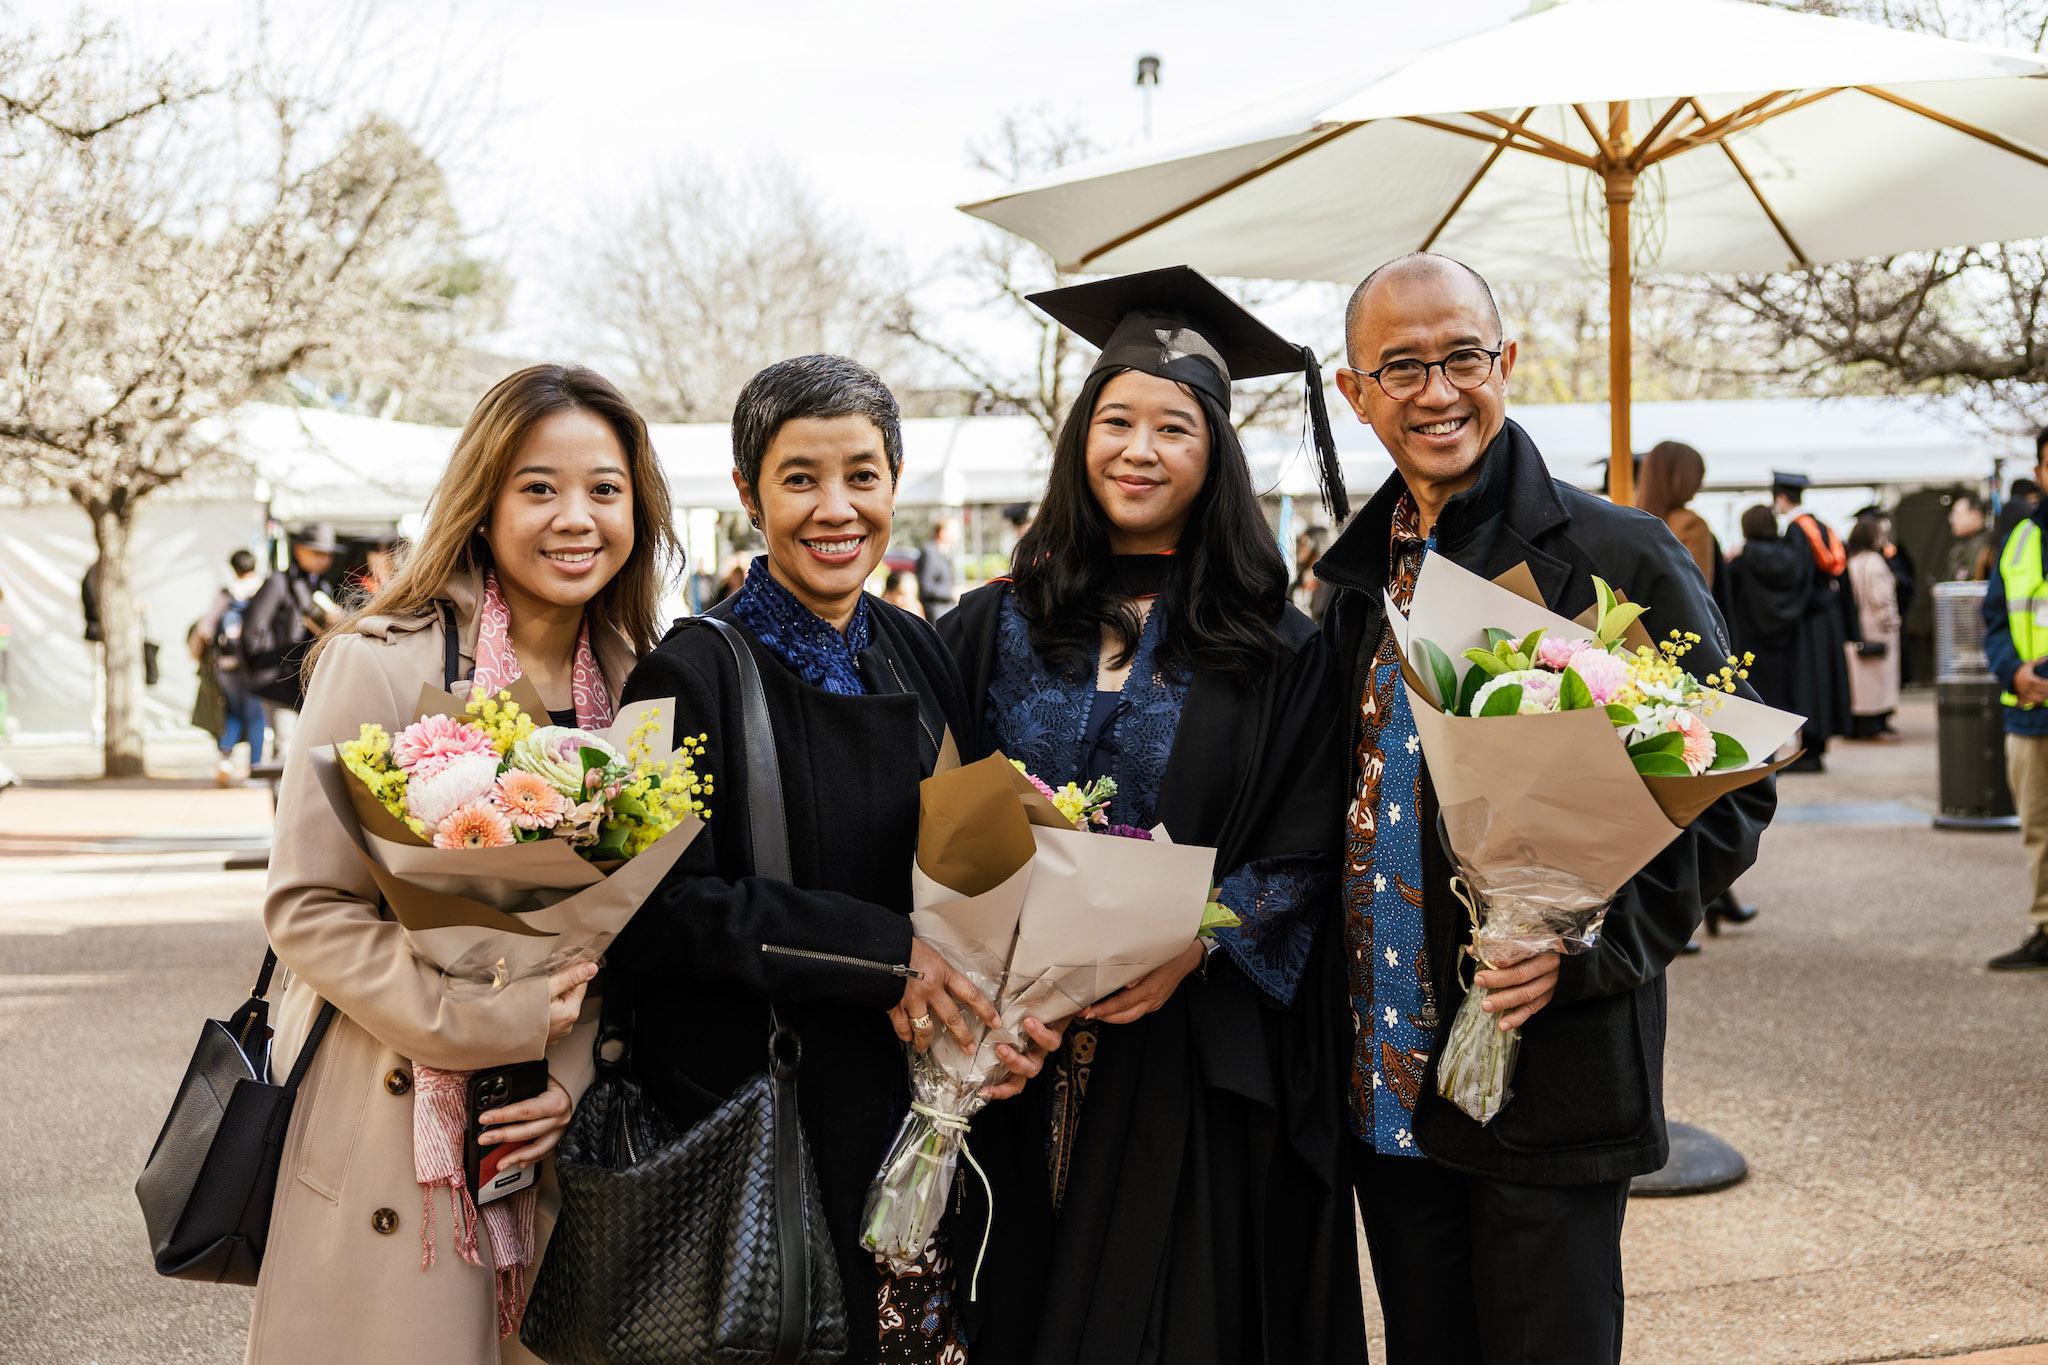 A family from the CAP graduations standing outdoors holding flowers and smiling